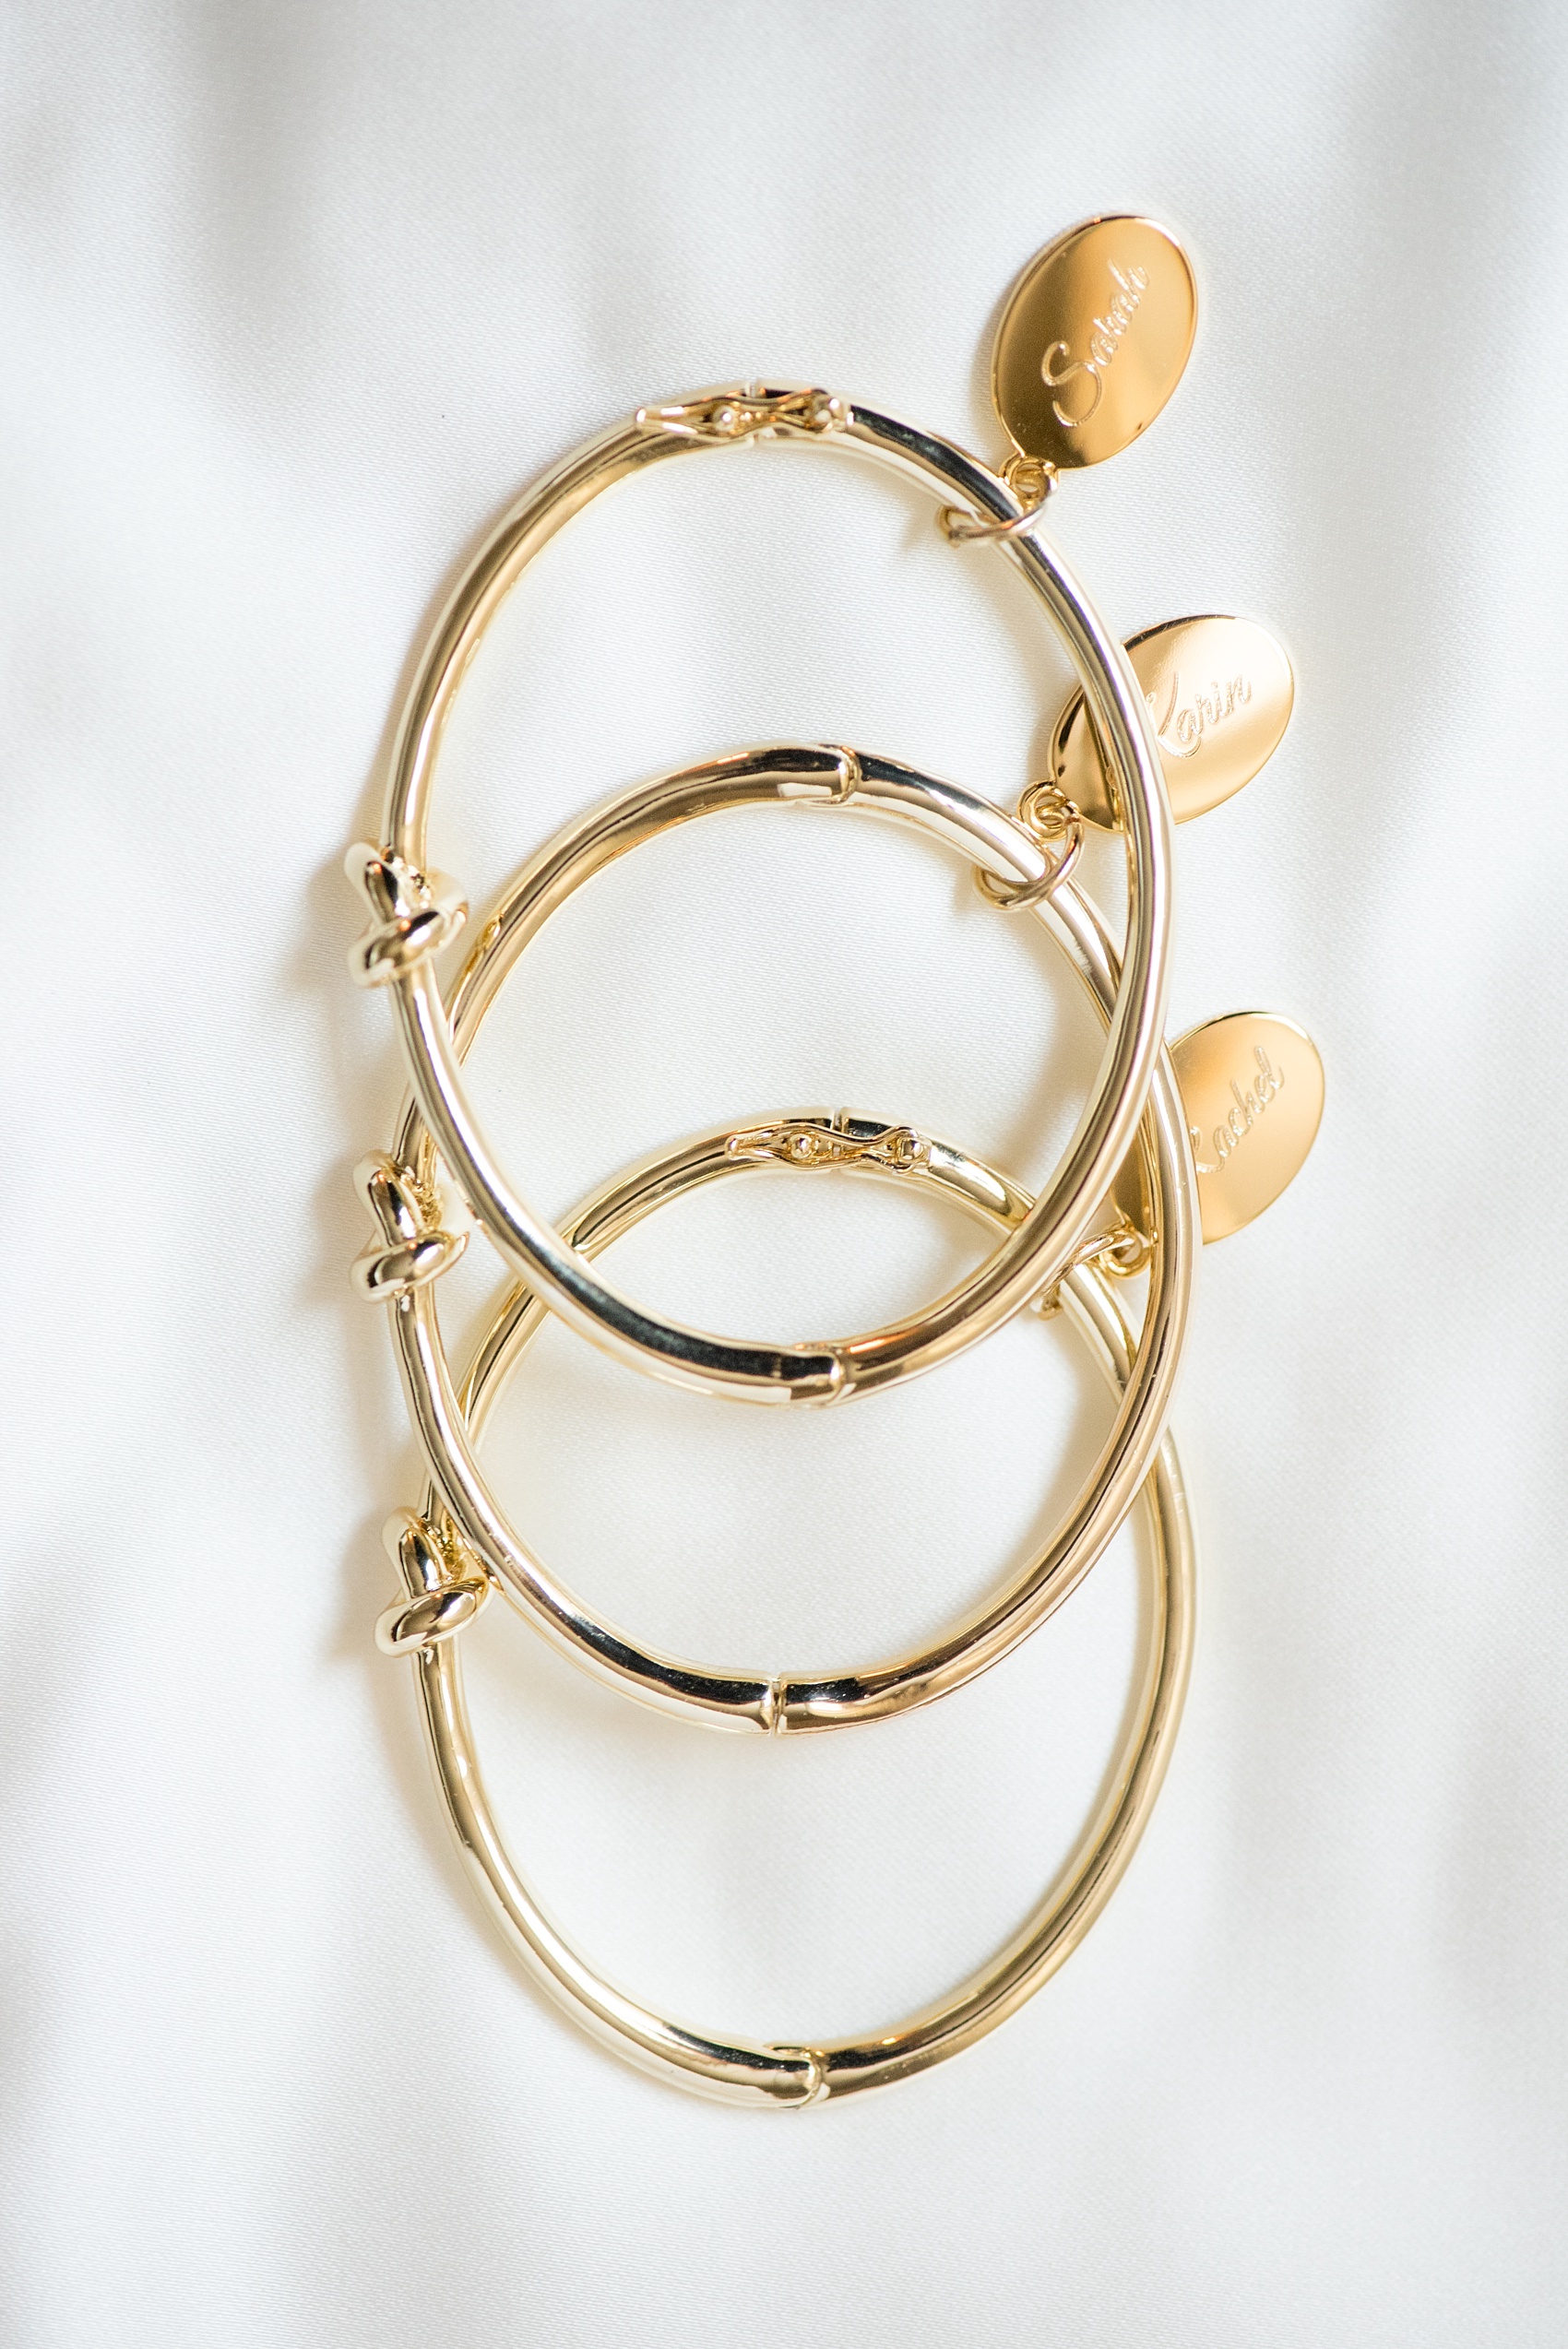 Mikkel Paige Photography detail photo of bridesmaids gifts: gold "tie the knot" bracelets with their names on charms.